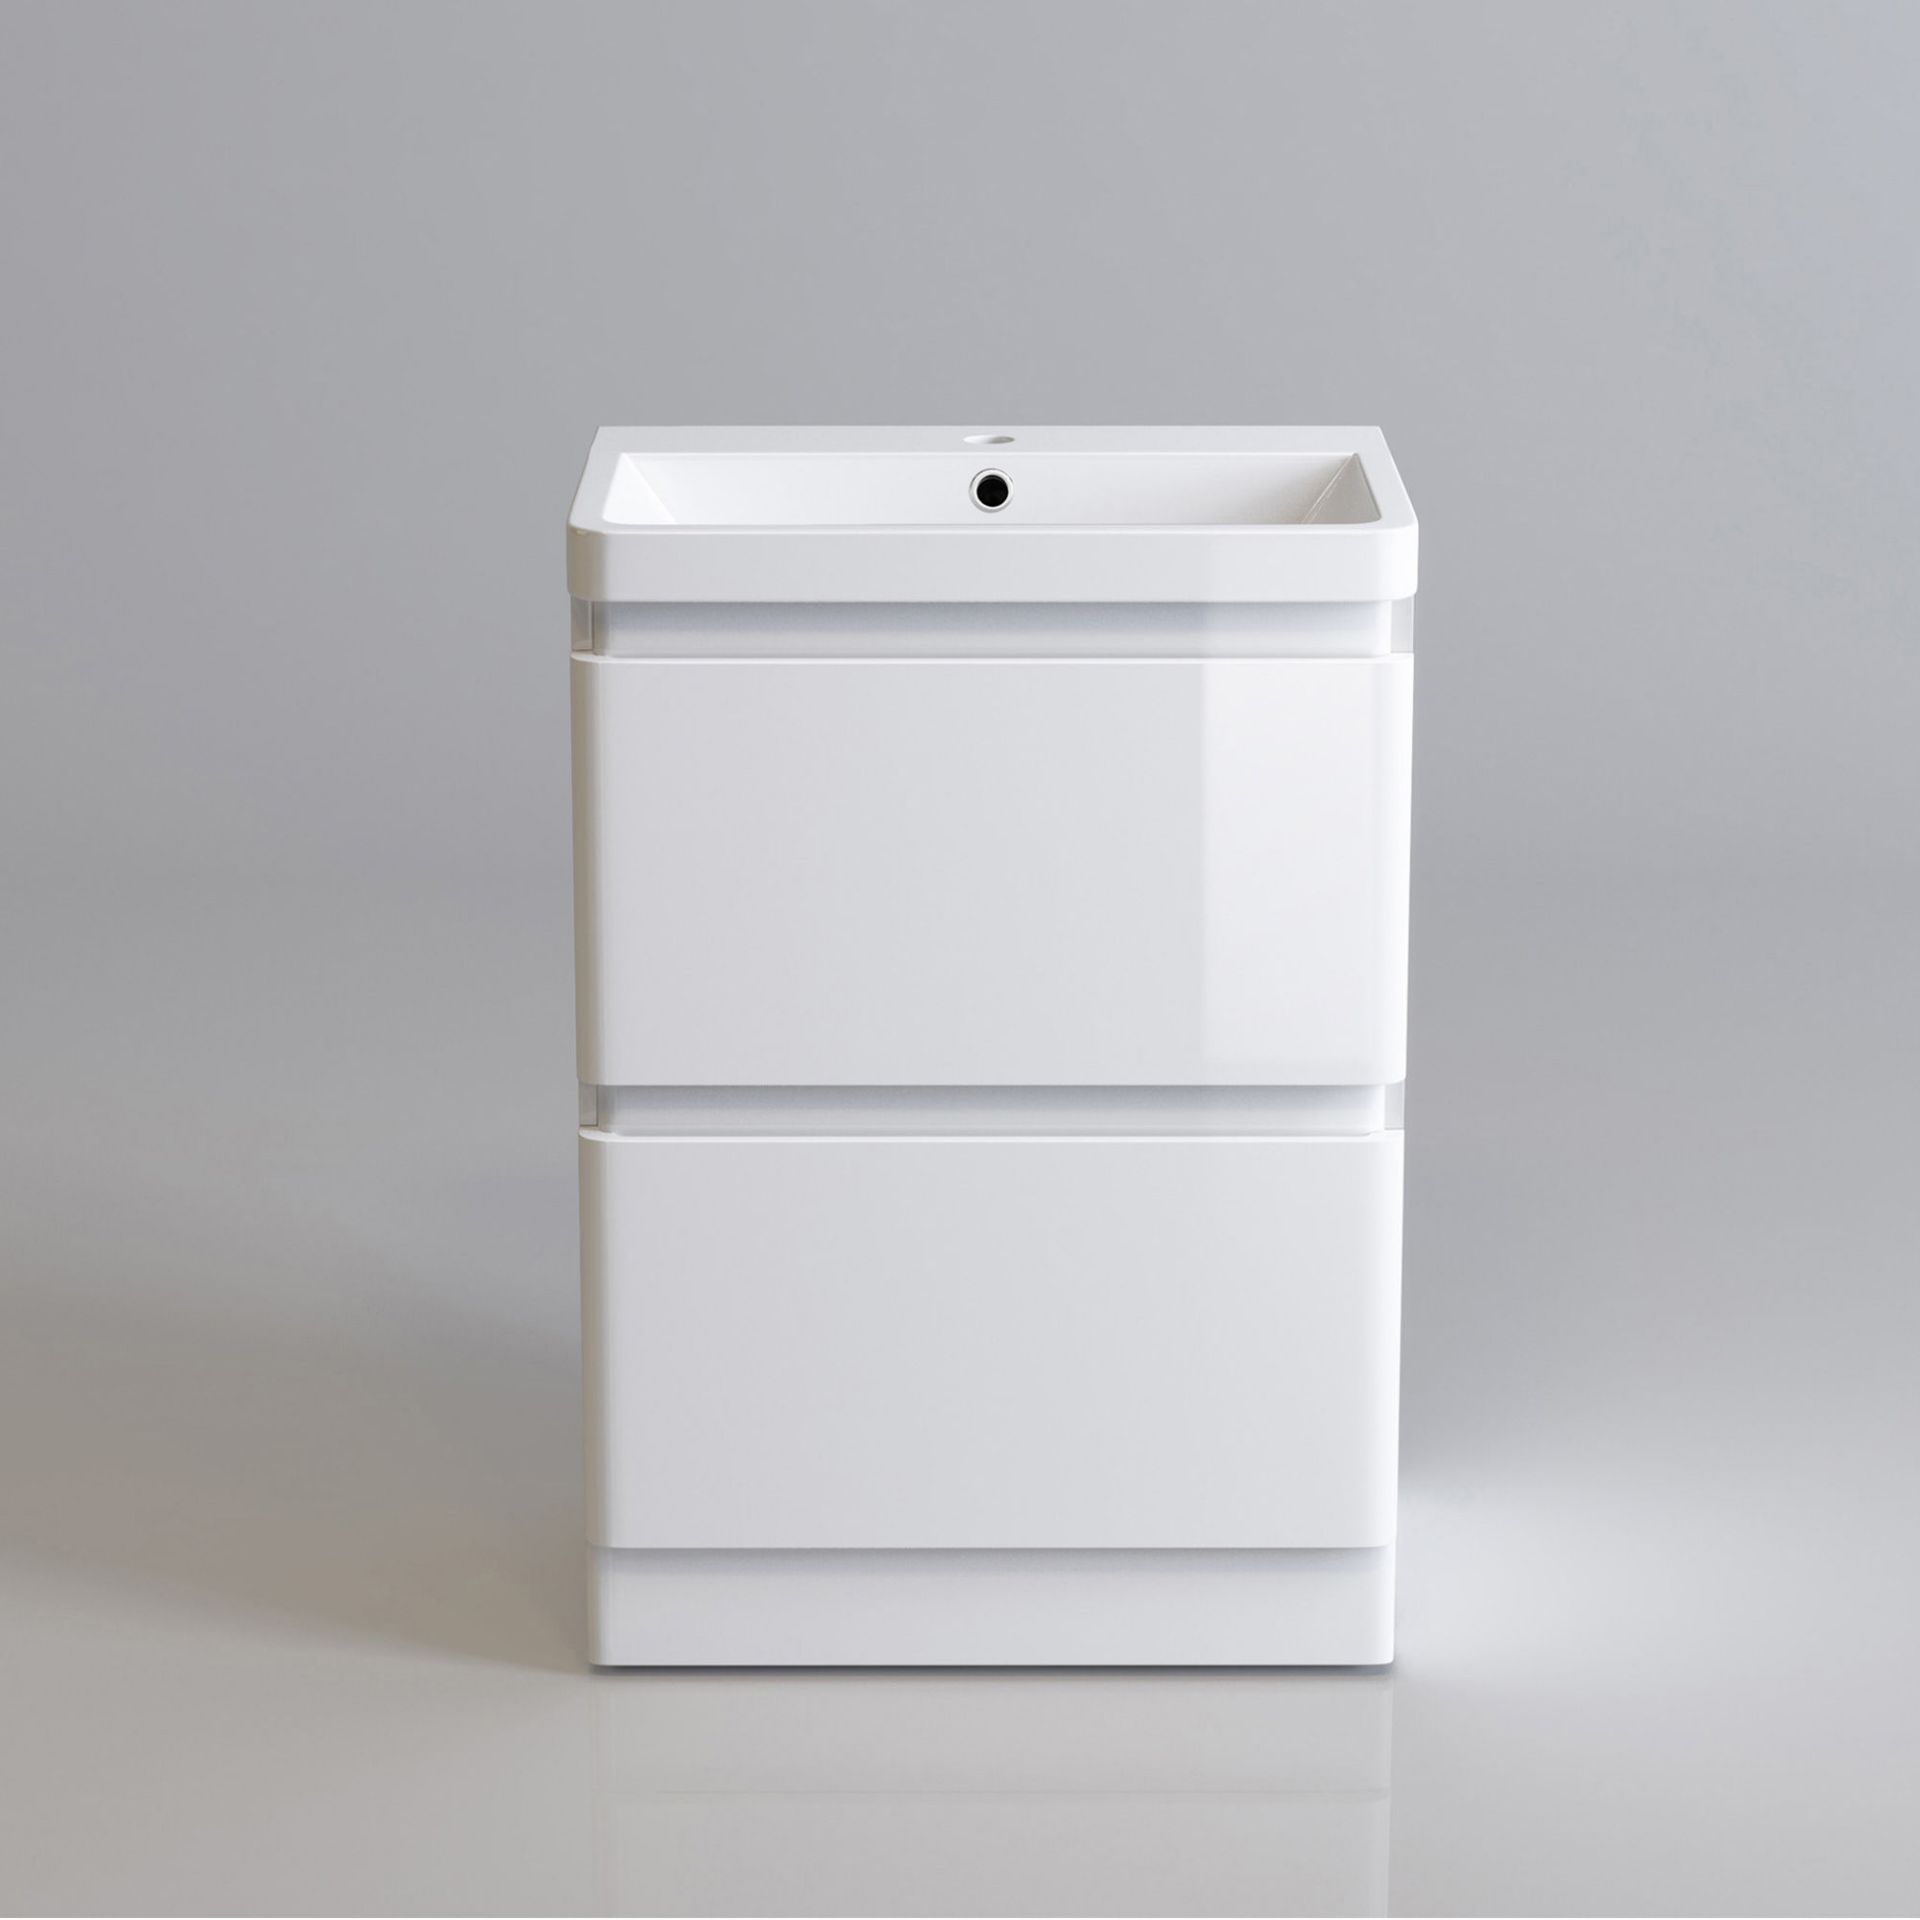 (KL300) 600mm Denver Gloss White Drawer Unit - Floor Standing. . Does NOT include basin. If you - Image 4 of 4